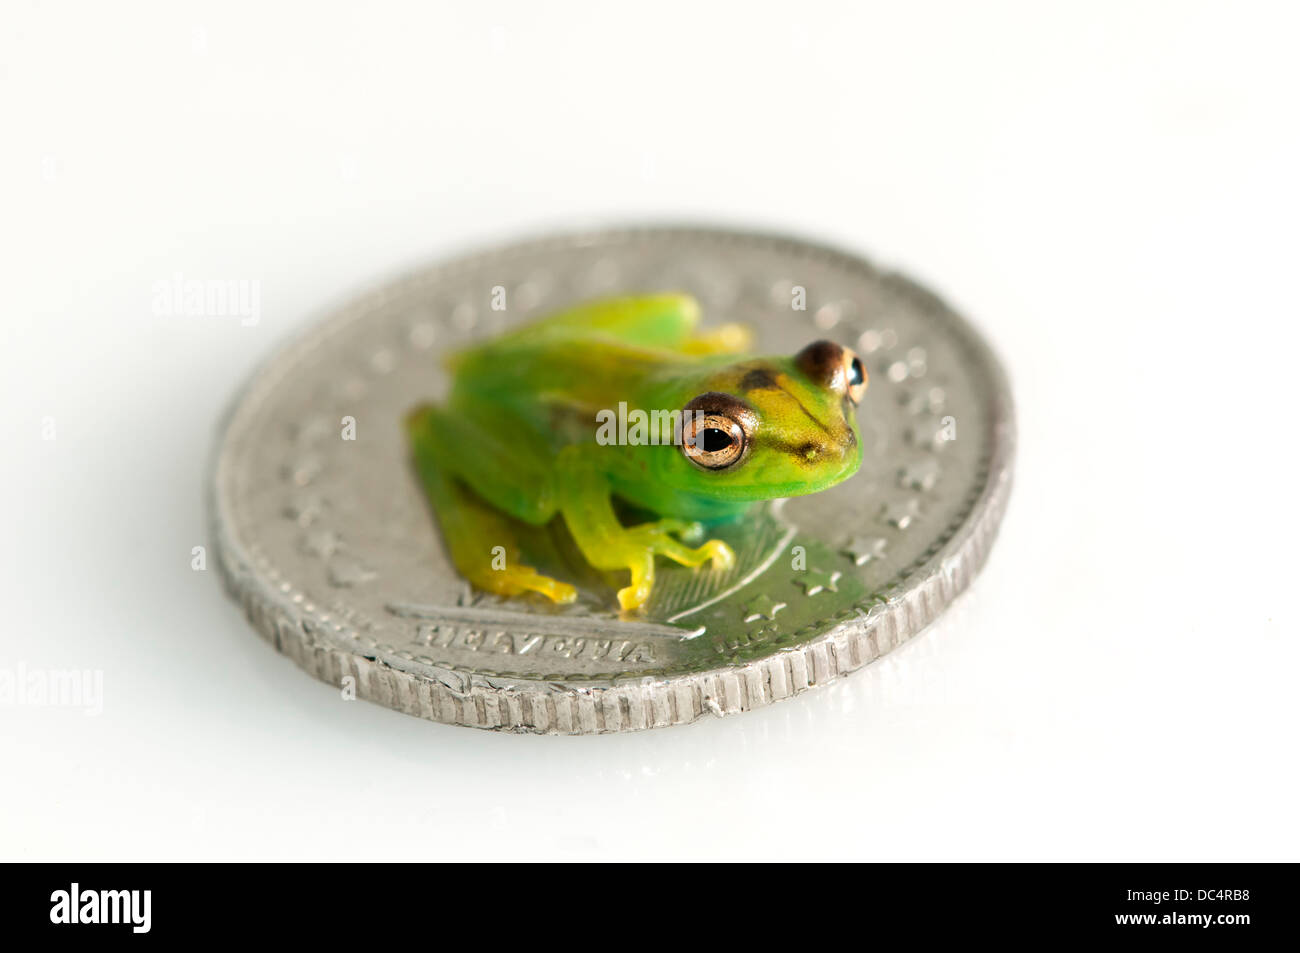 Juvenile of Orinoco lime tree frog (Sphaenorhynchus lacteus) sitting on a coin, Tambopata Nature Reserve, Madre de Dios region, Stock Photo